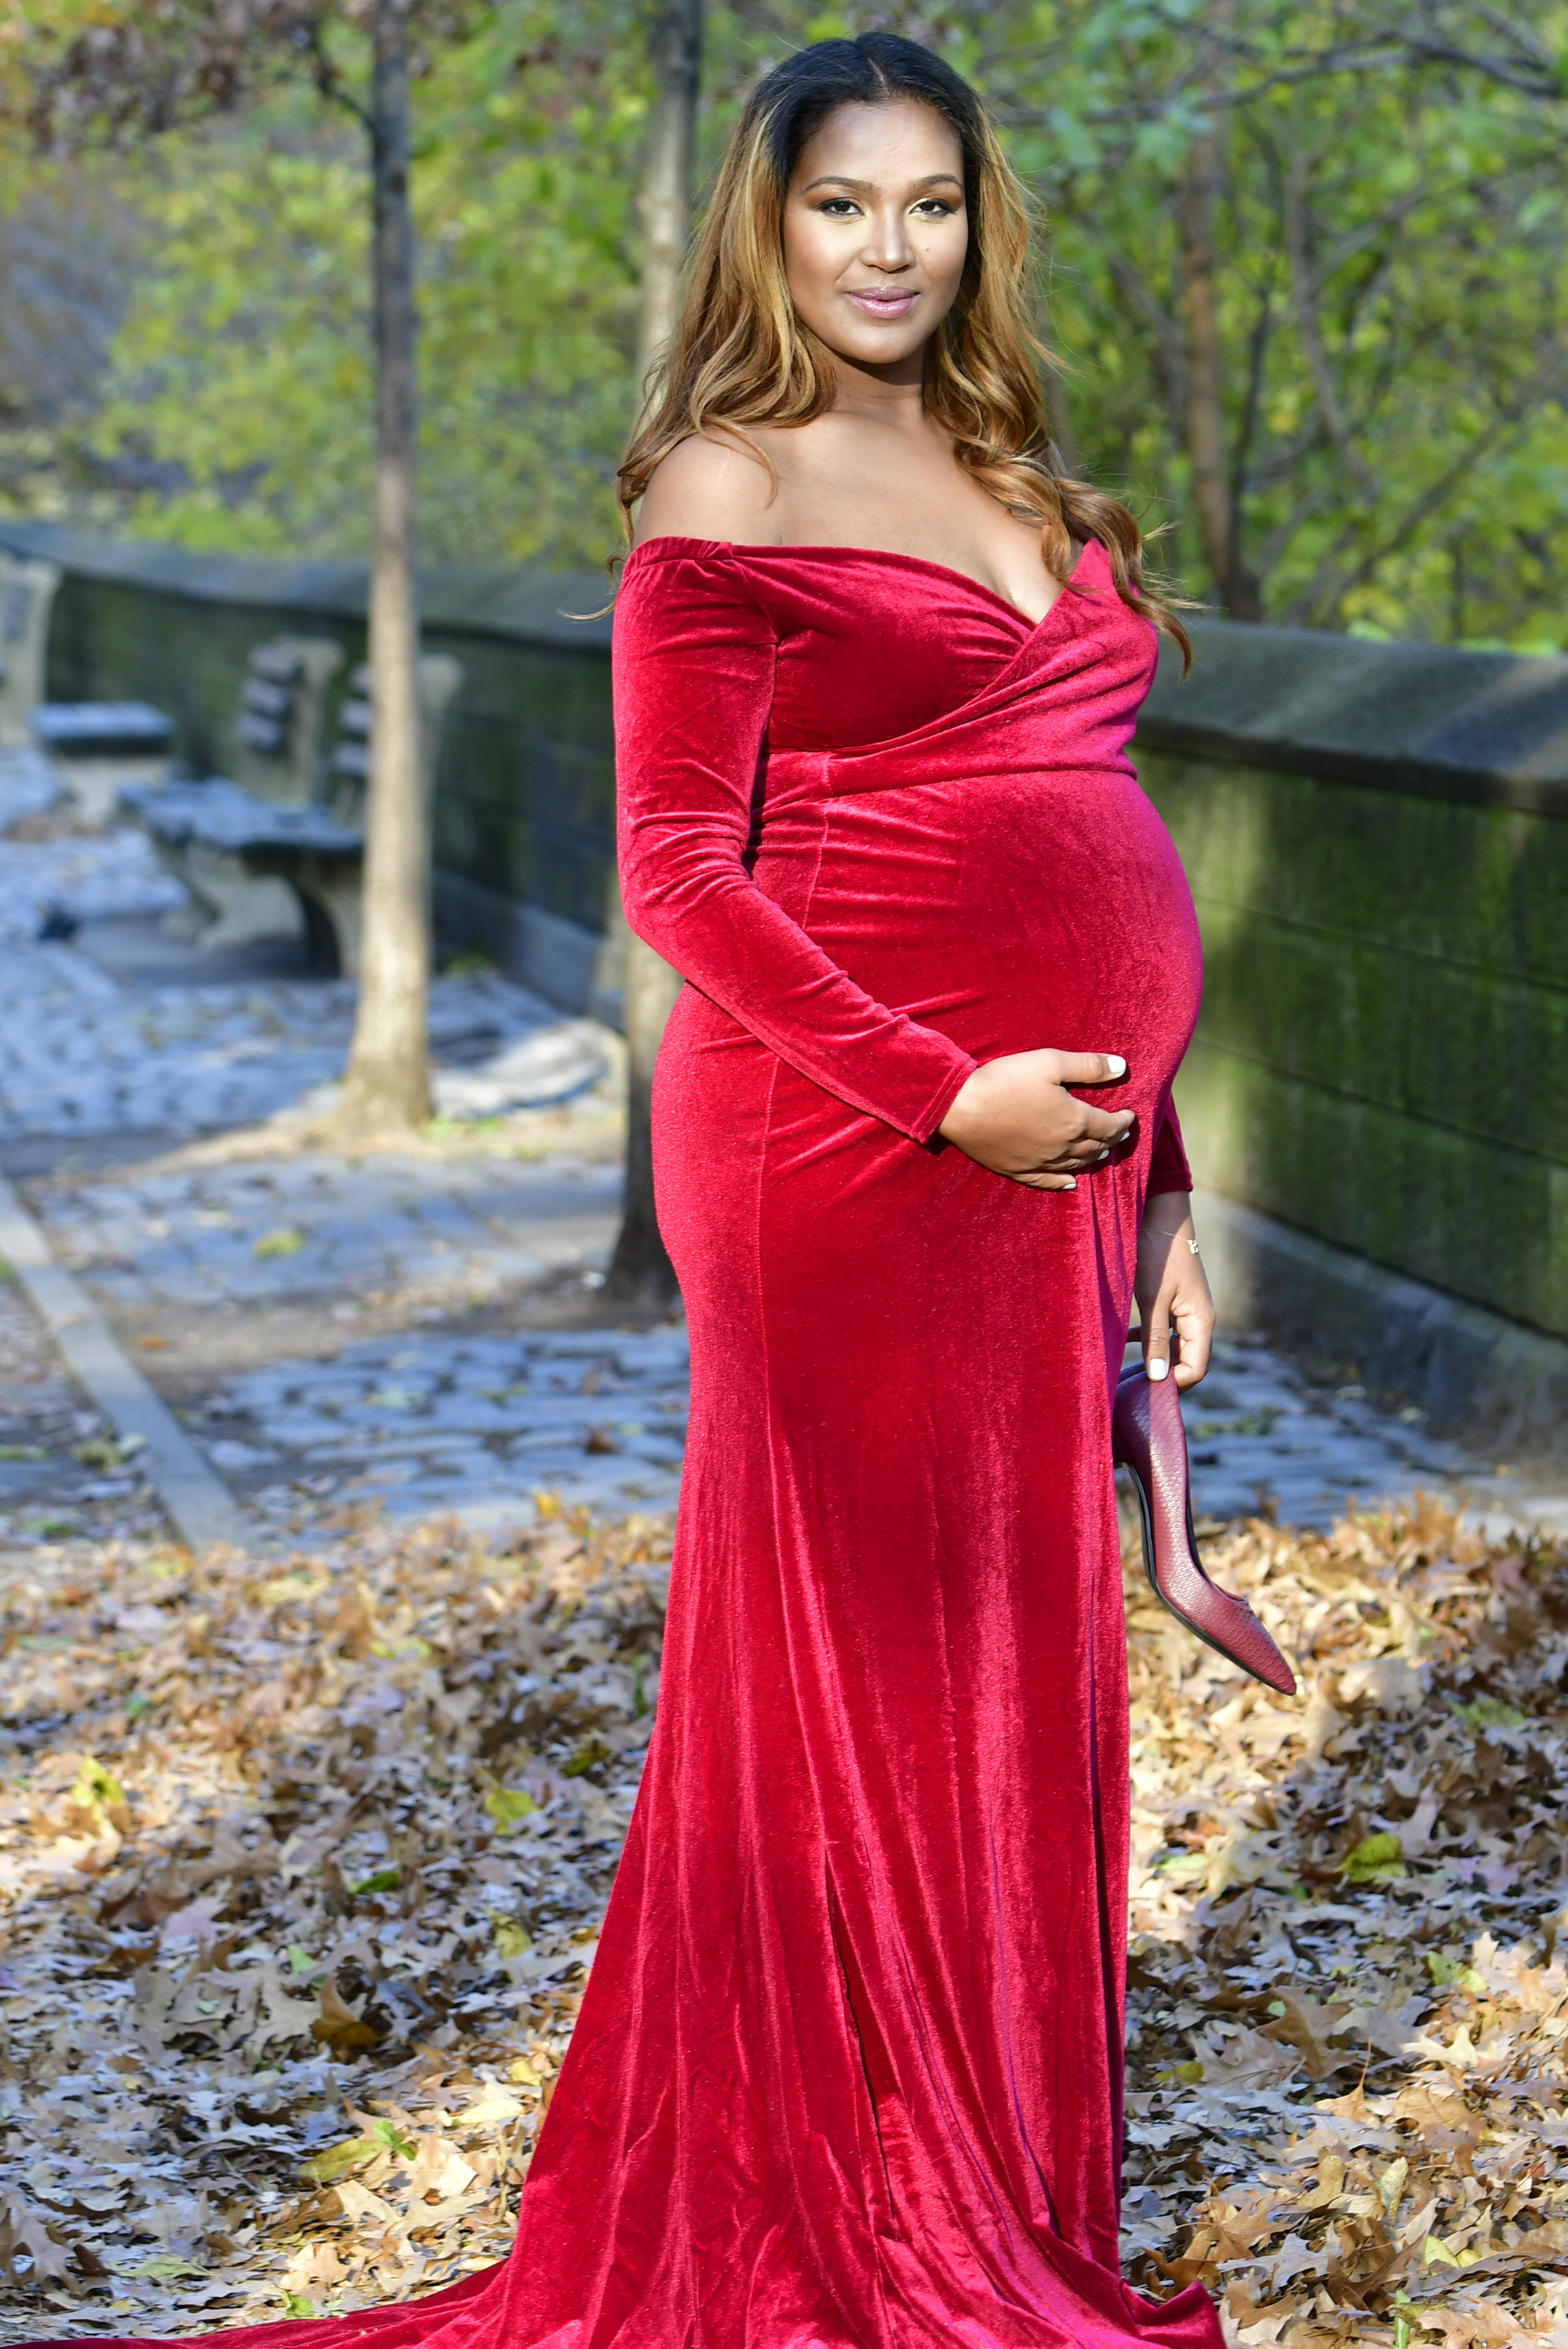 maternity photographer NYC   central park west